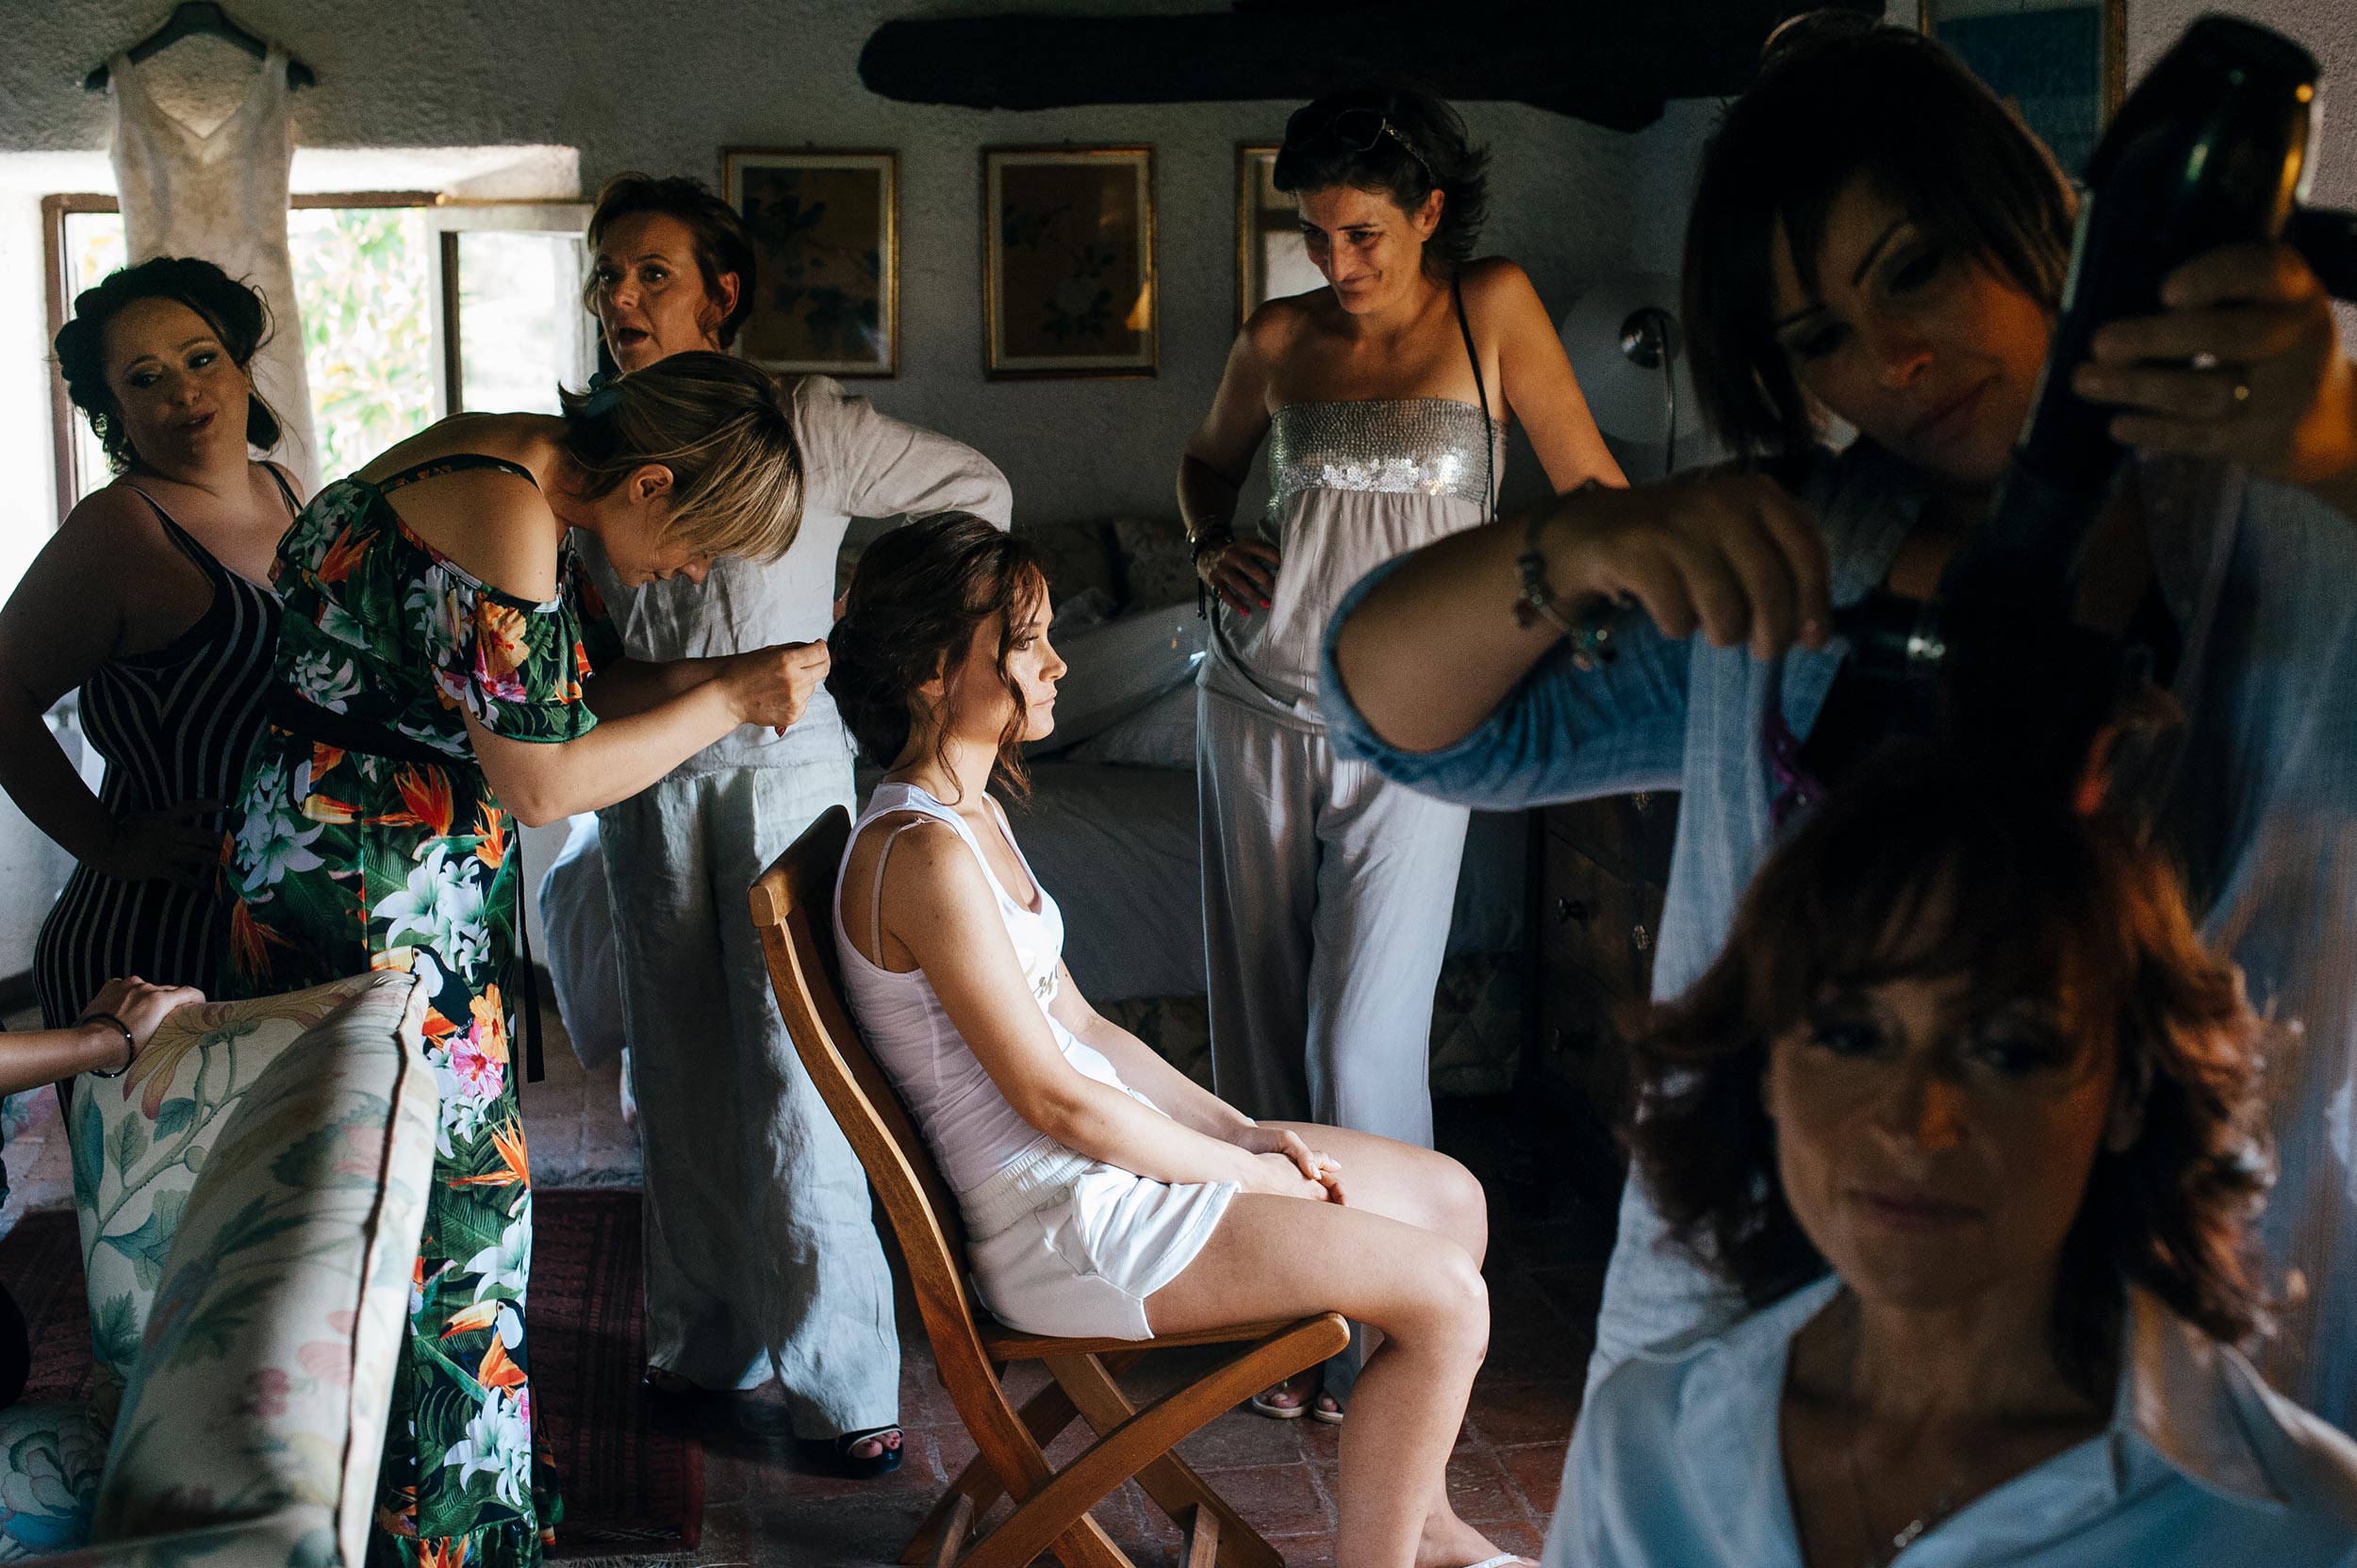 bride-getting-ready-with-many-people-castellina-de-miremont.jpg